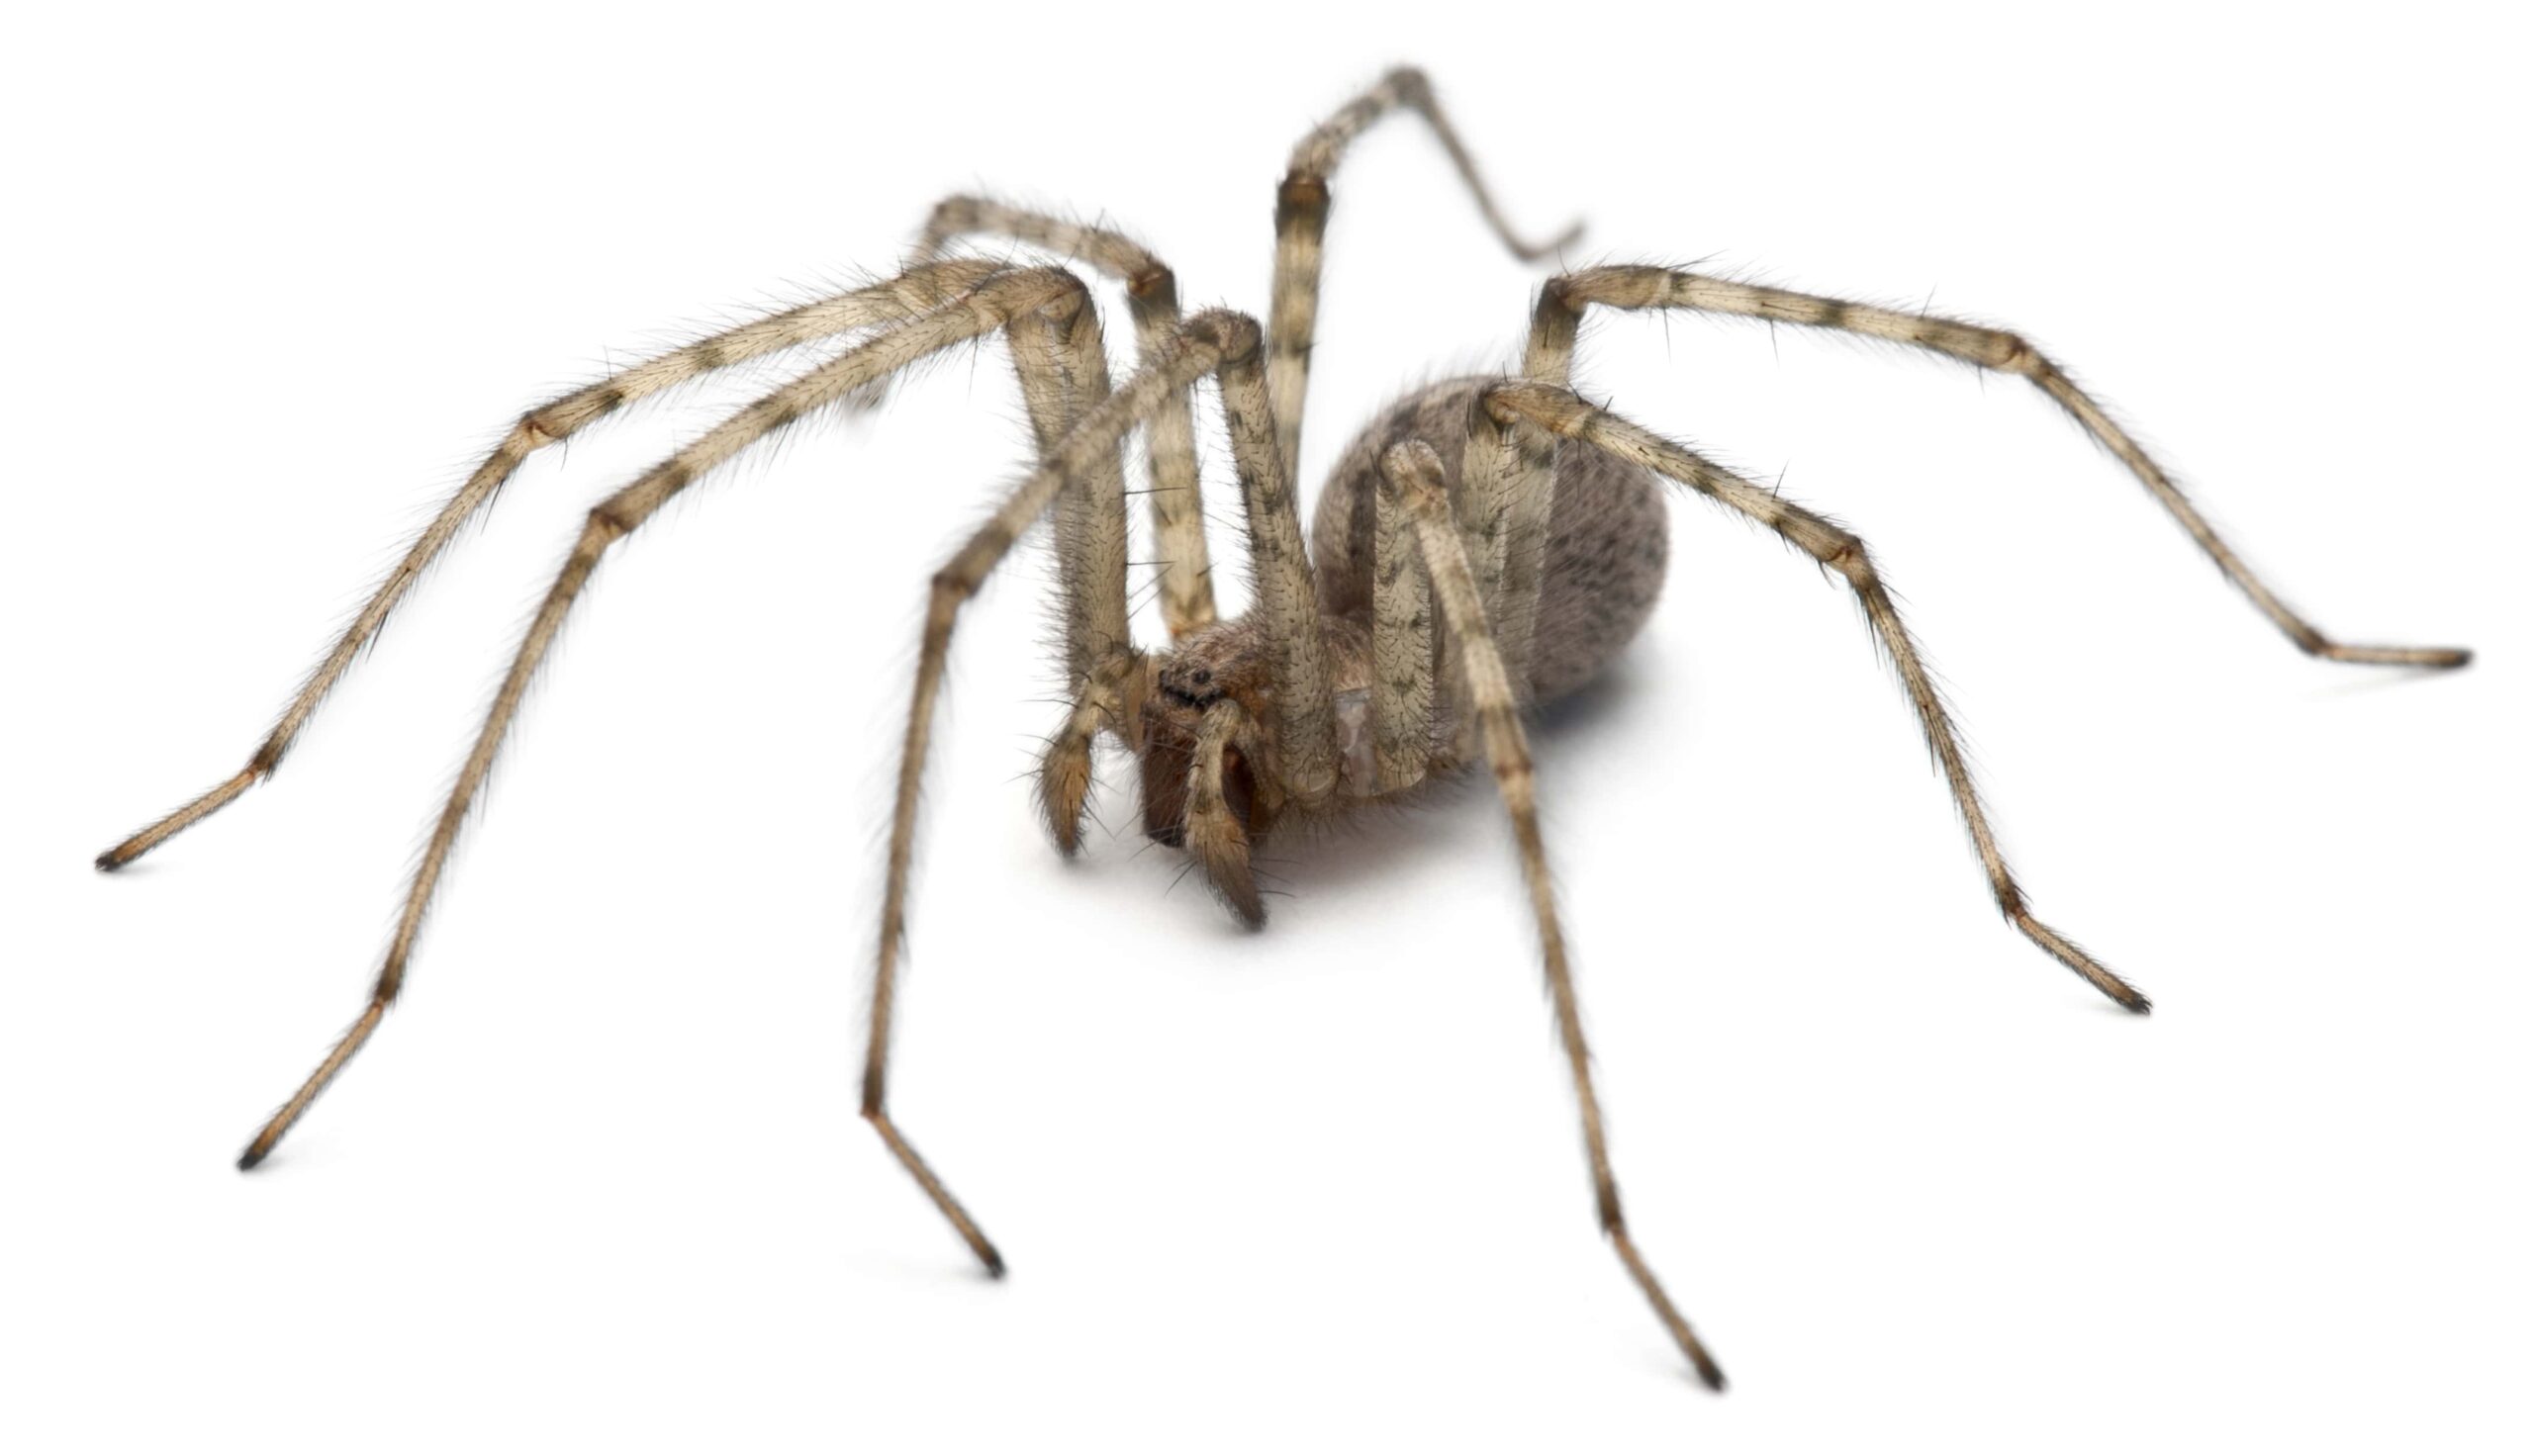 Meet the Arachnid That May Add a New Chapter to the Book on Sensory Biology  | The Scientist Magazine®